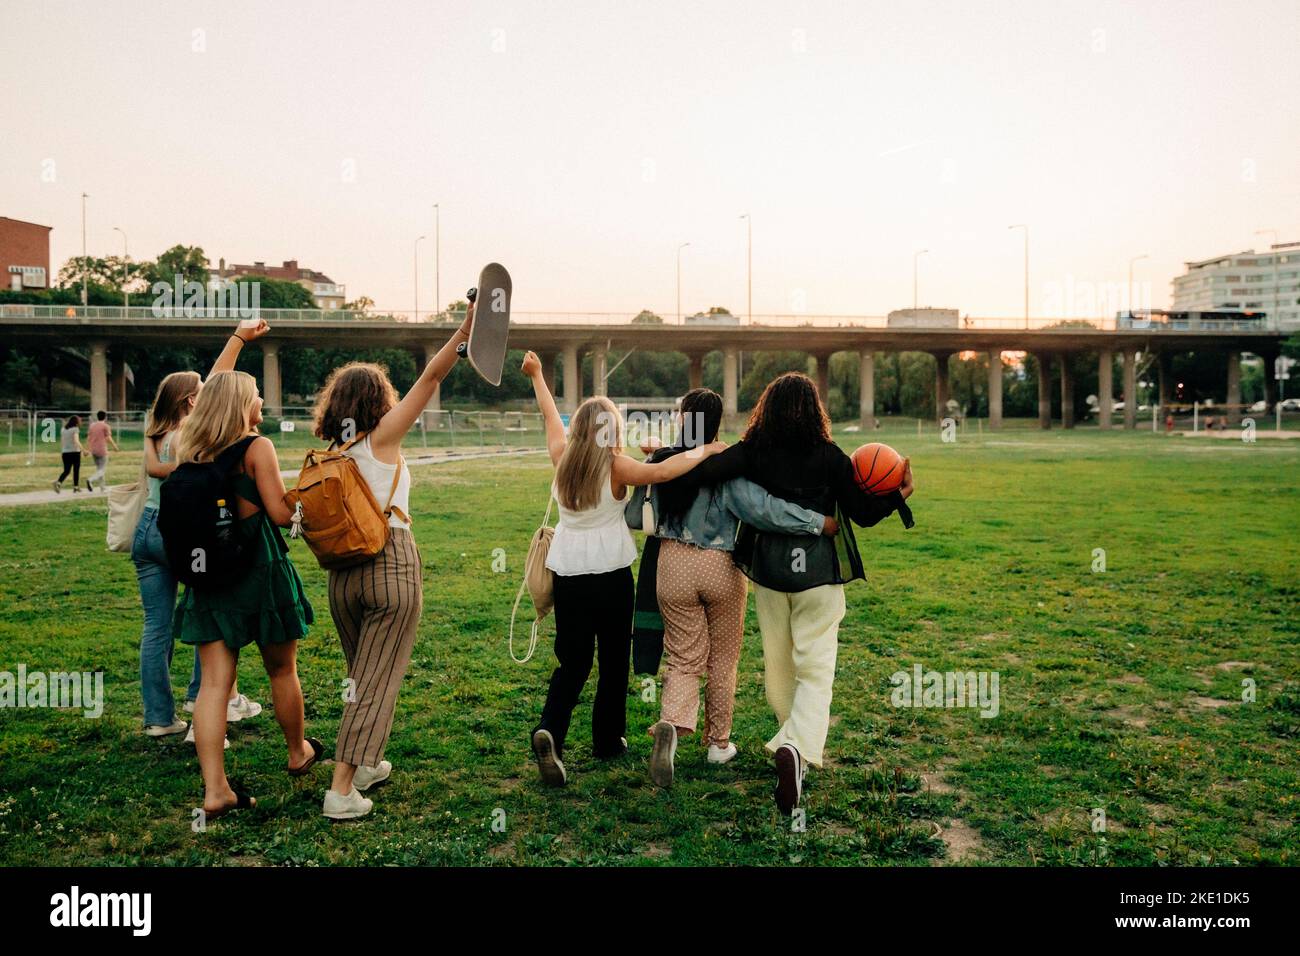 Rear view of teenage girls with hand raised walking by friends at park Stock Photo